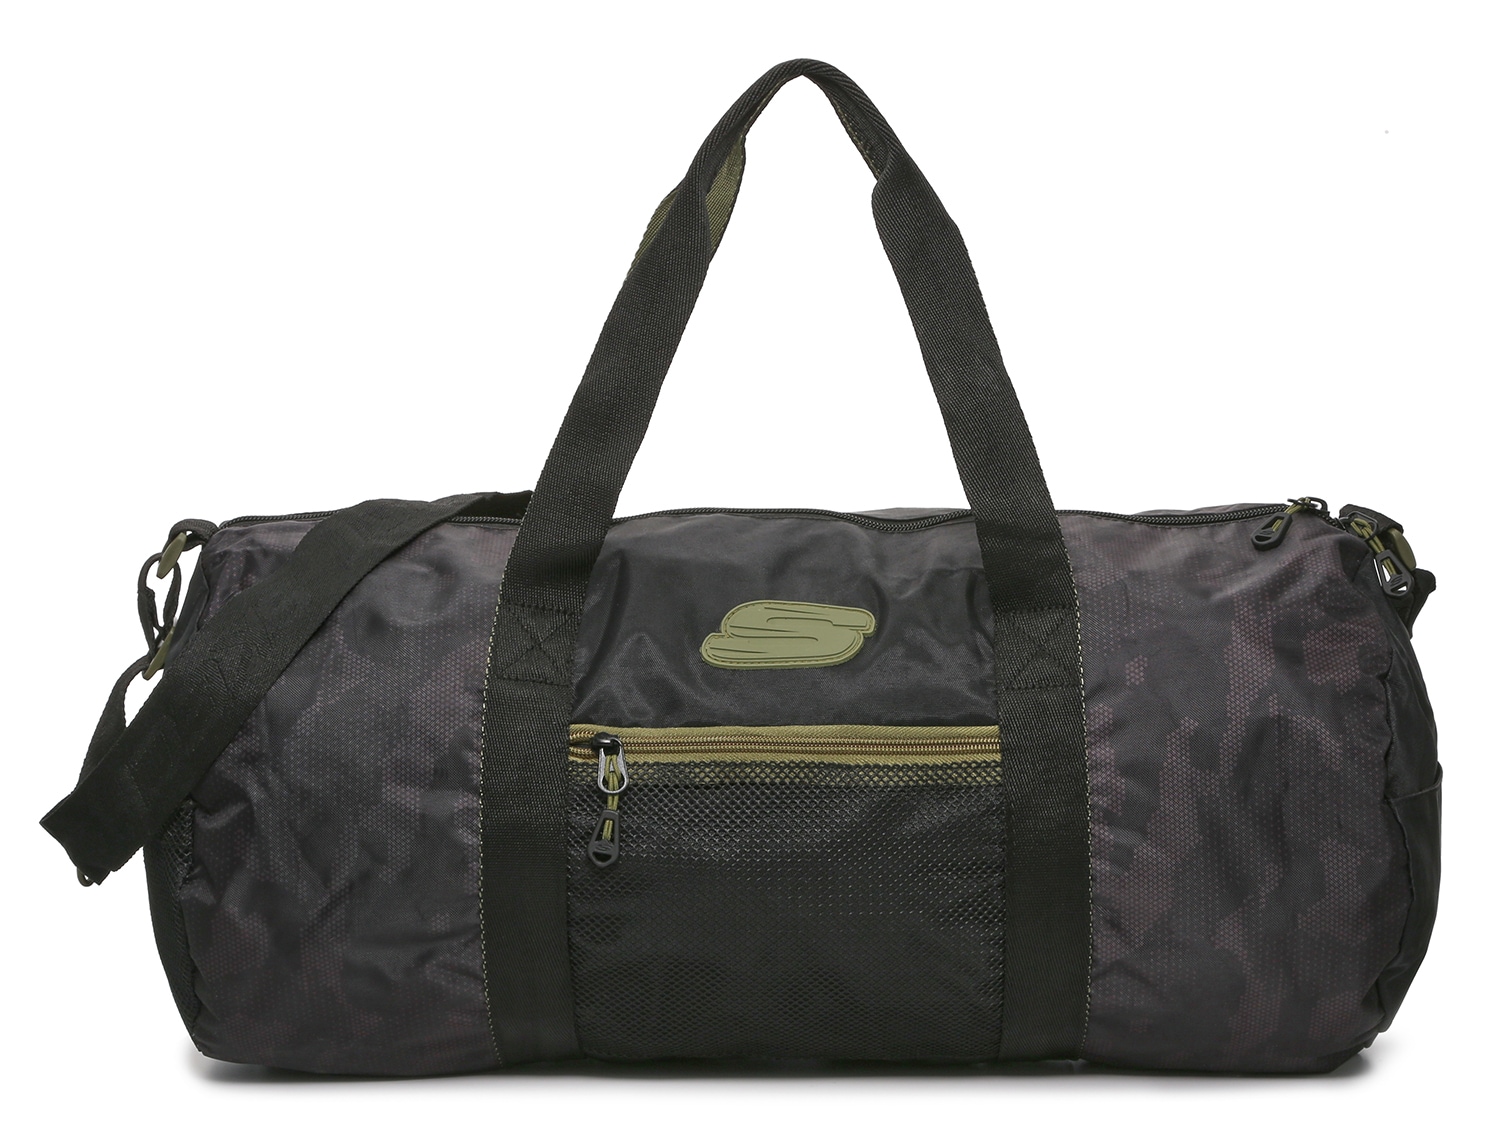 Skechers Athletic Duffle Bag - Free Shipping | DSW